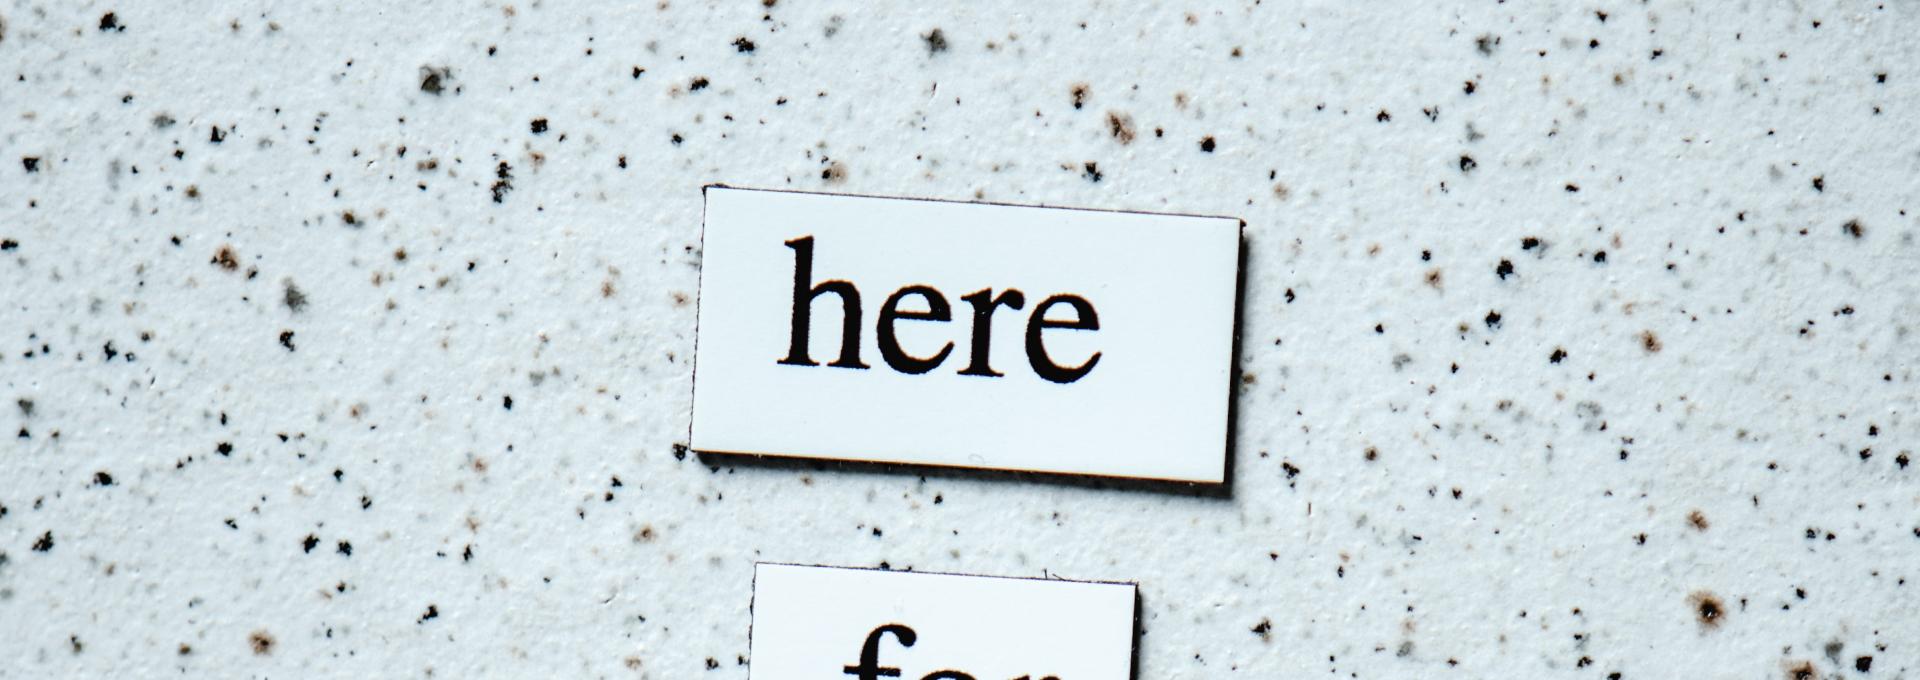 A photo showing the words "here for you."